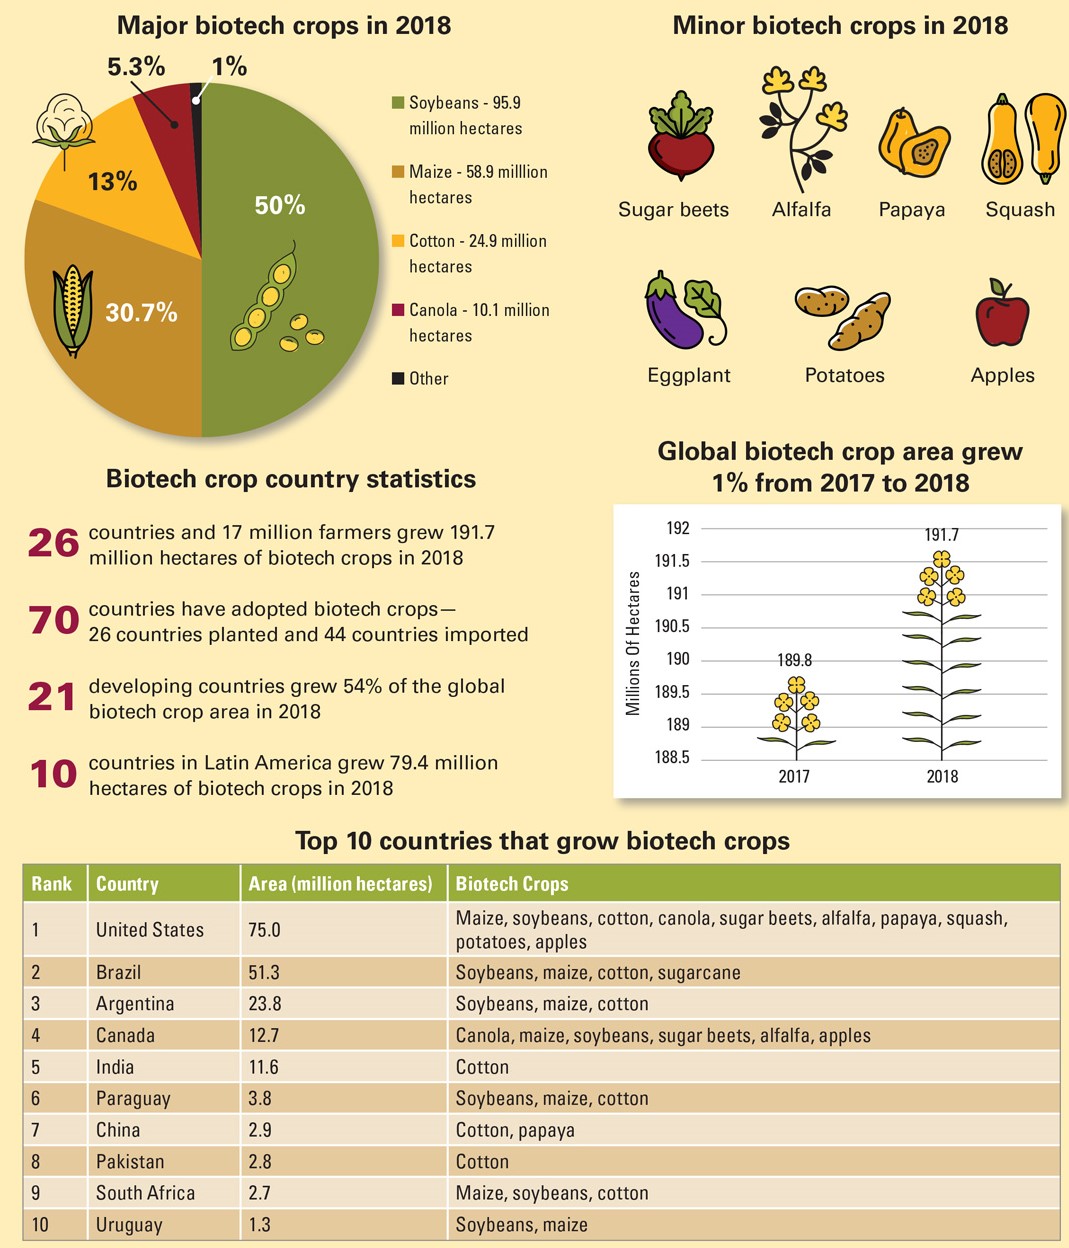 Major and Minor Biotech Crops in 2018